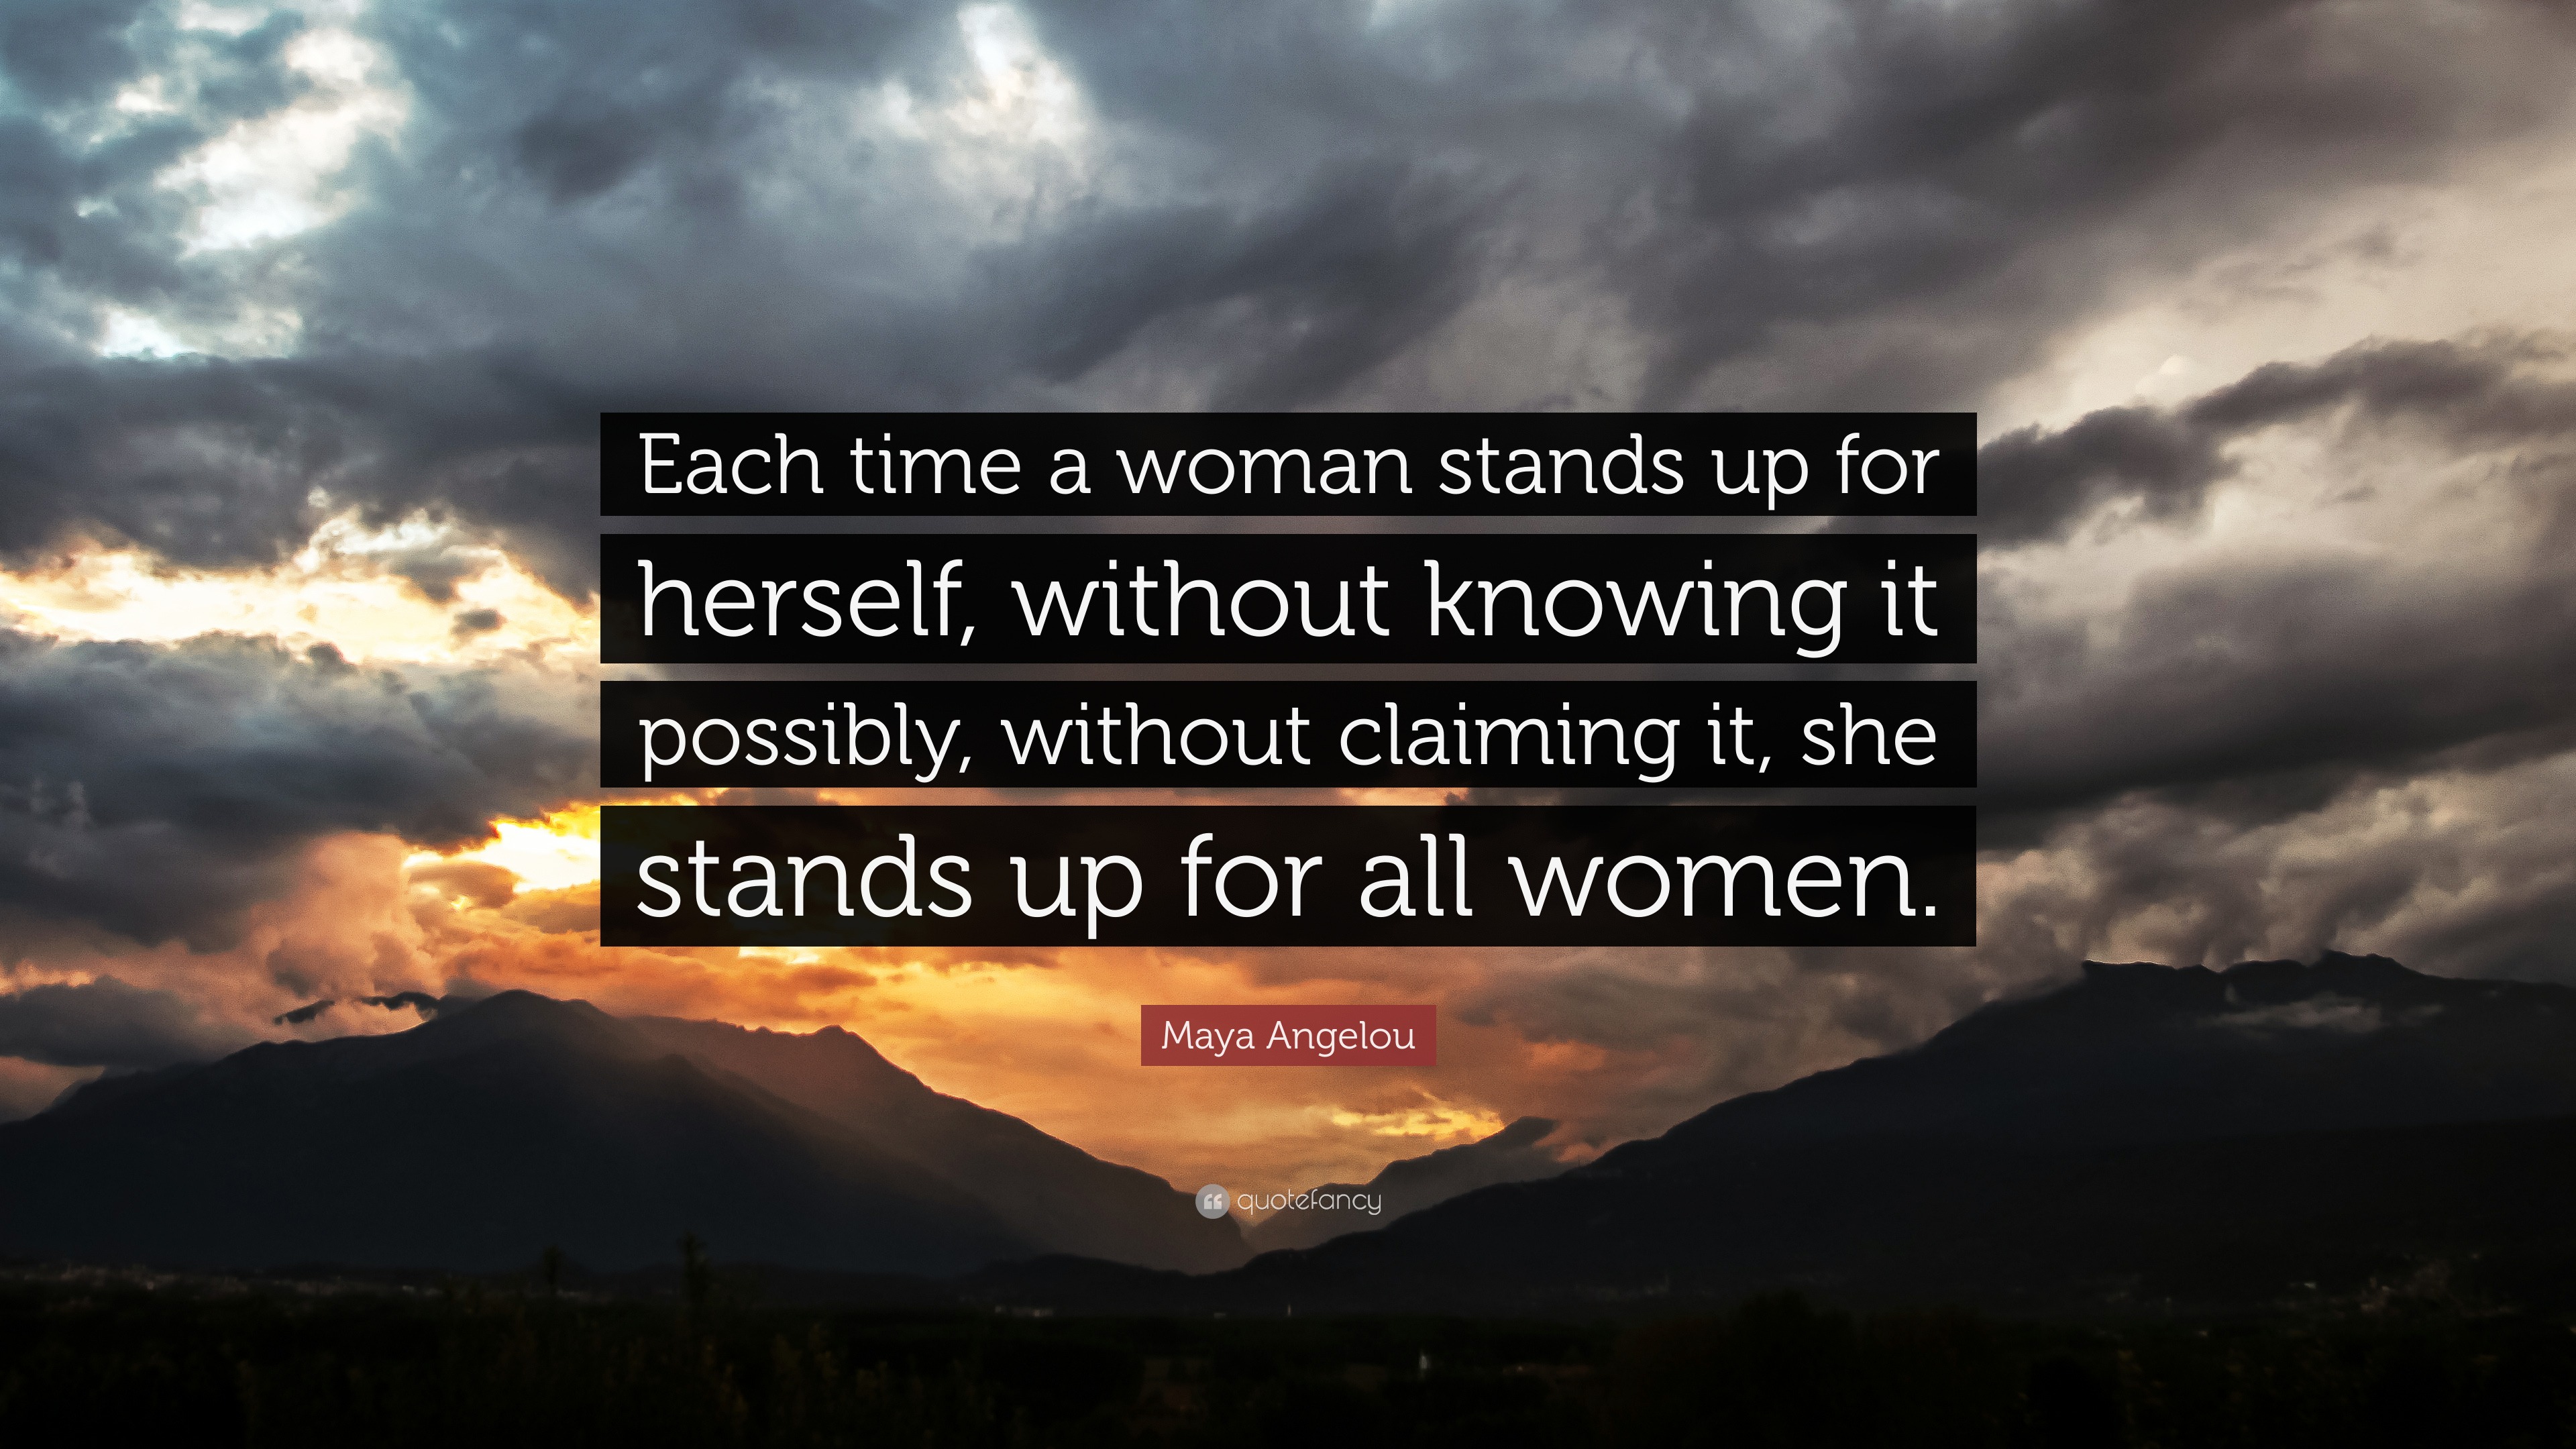 Maya Angelou Quote: “Each time a woman stands up for herself